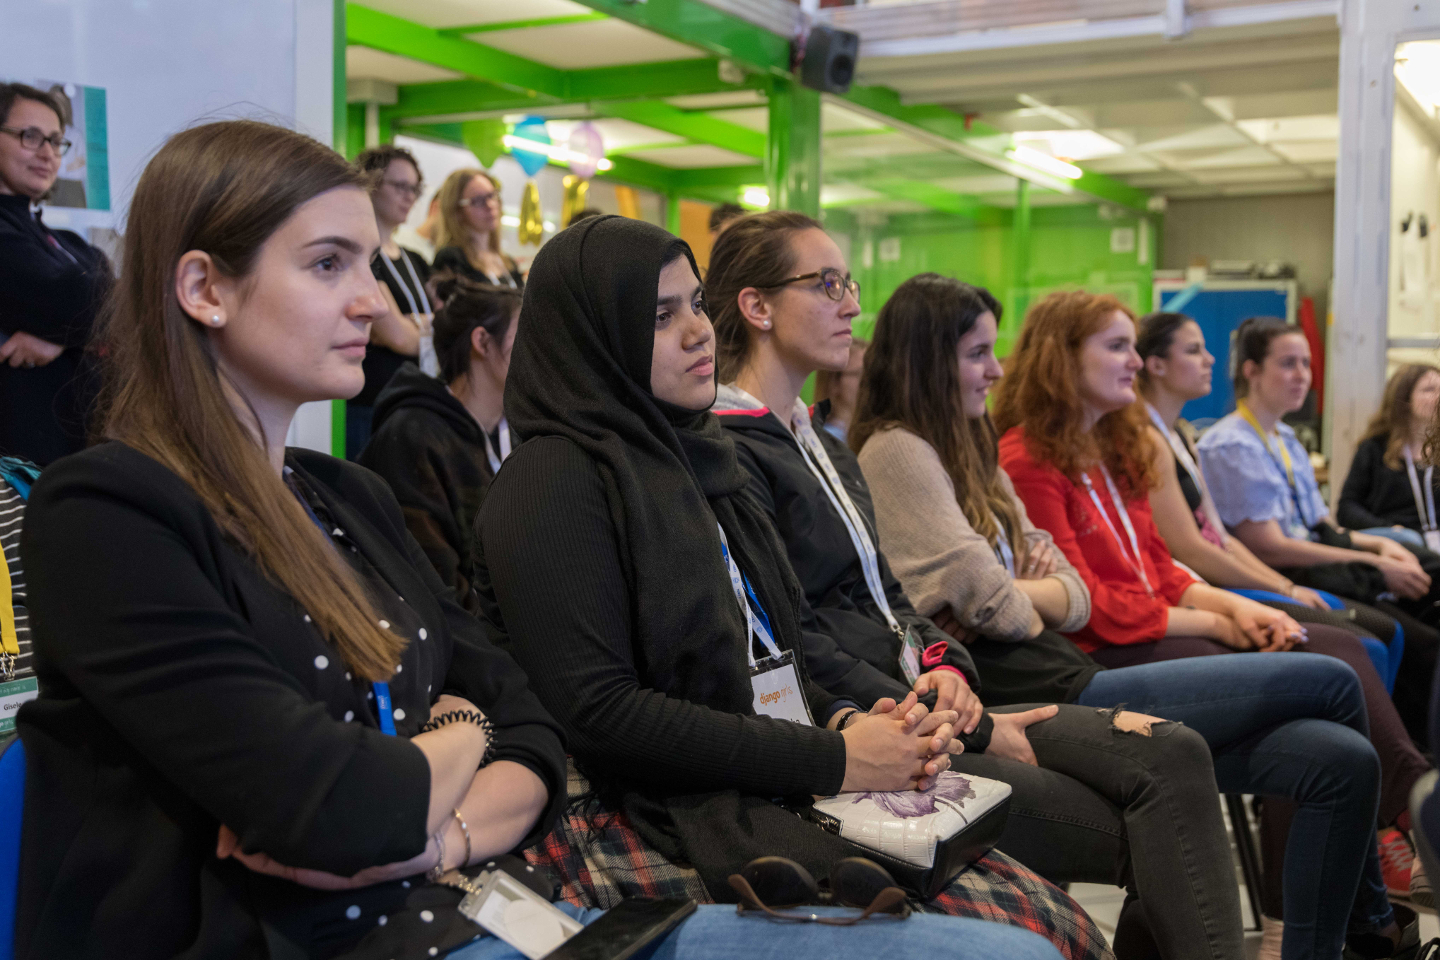 The volunteers of the Django Girls workshop attending the talk by the Deputy Head of CERN’s IT department, Maite Barroso Lopez